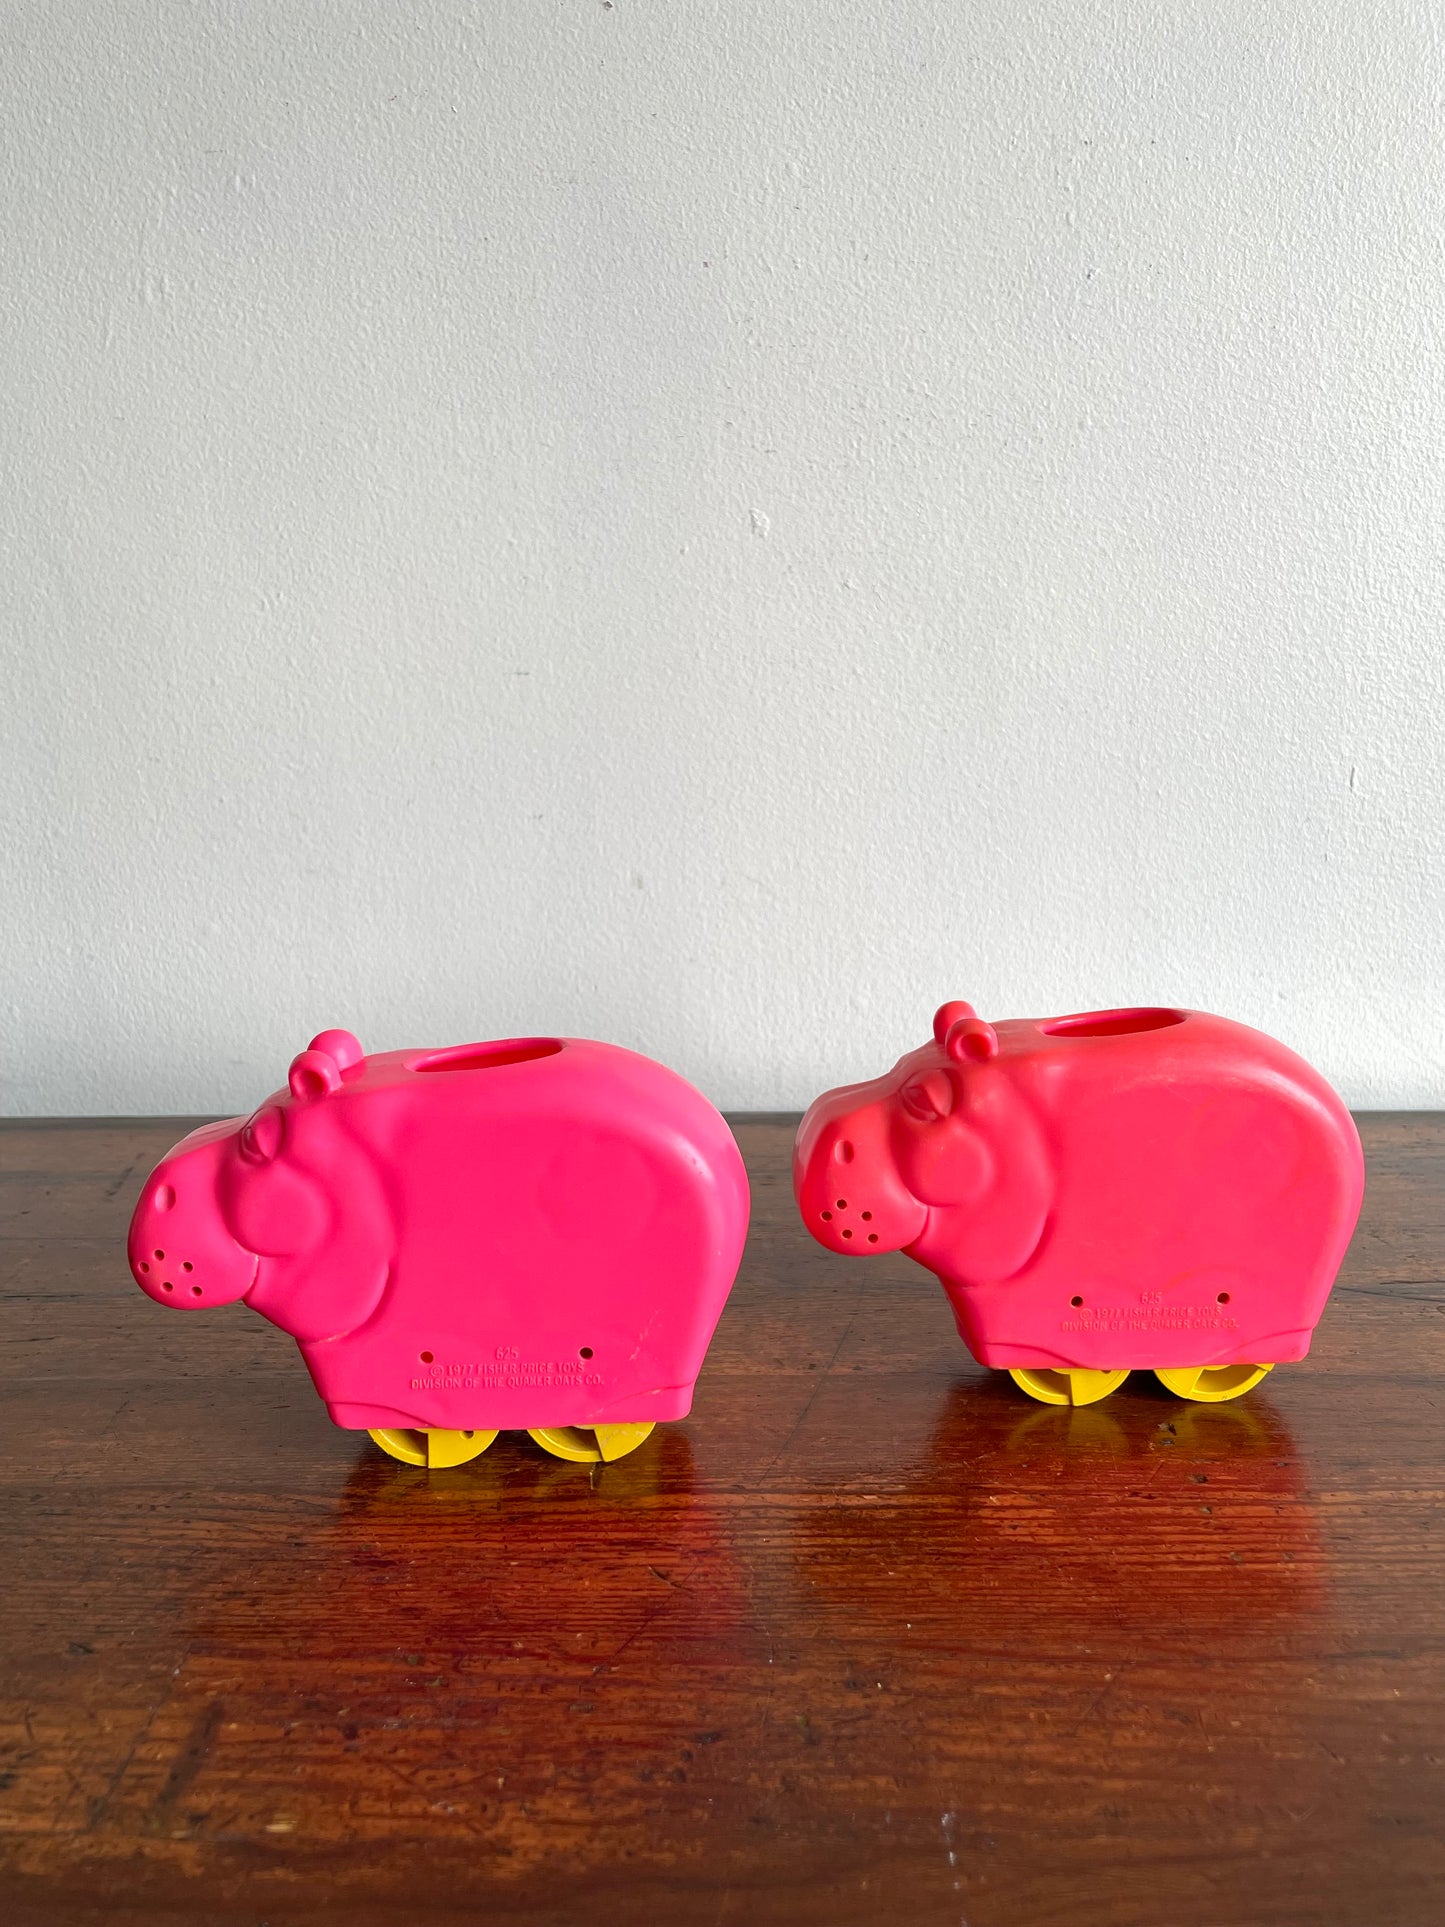 1977 Fisher Price Bright Pink Henry Hippo on Wheels #625 - Set of 2 Hippos